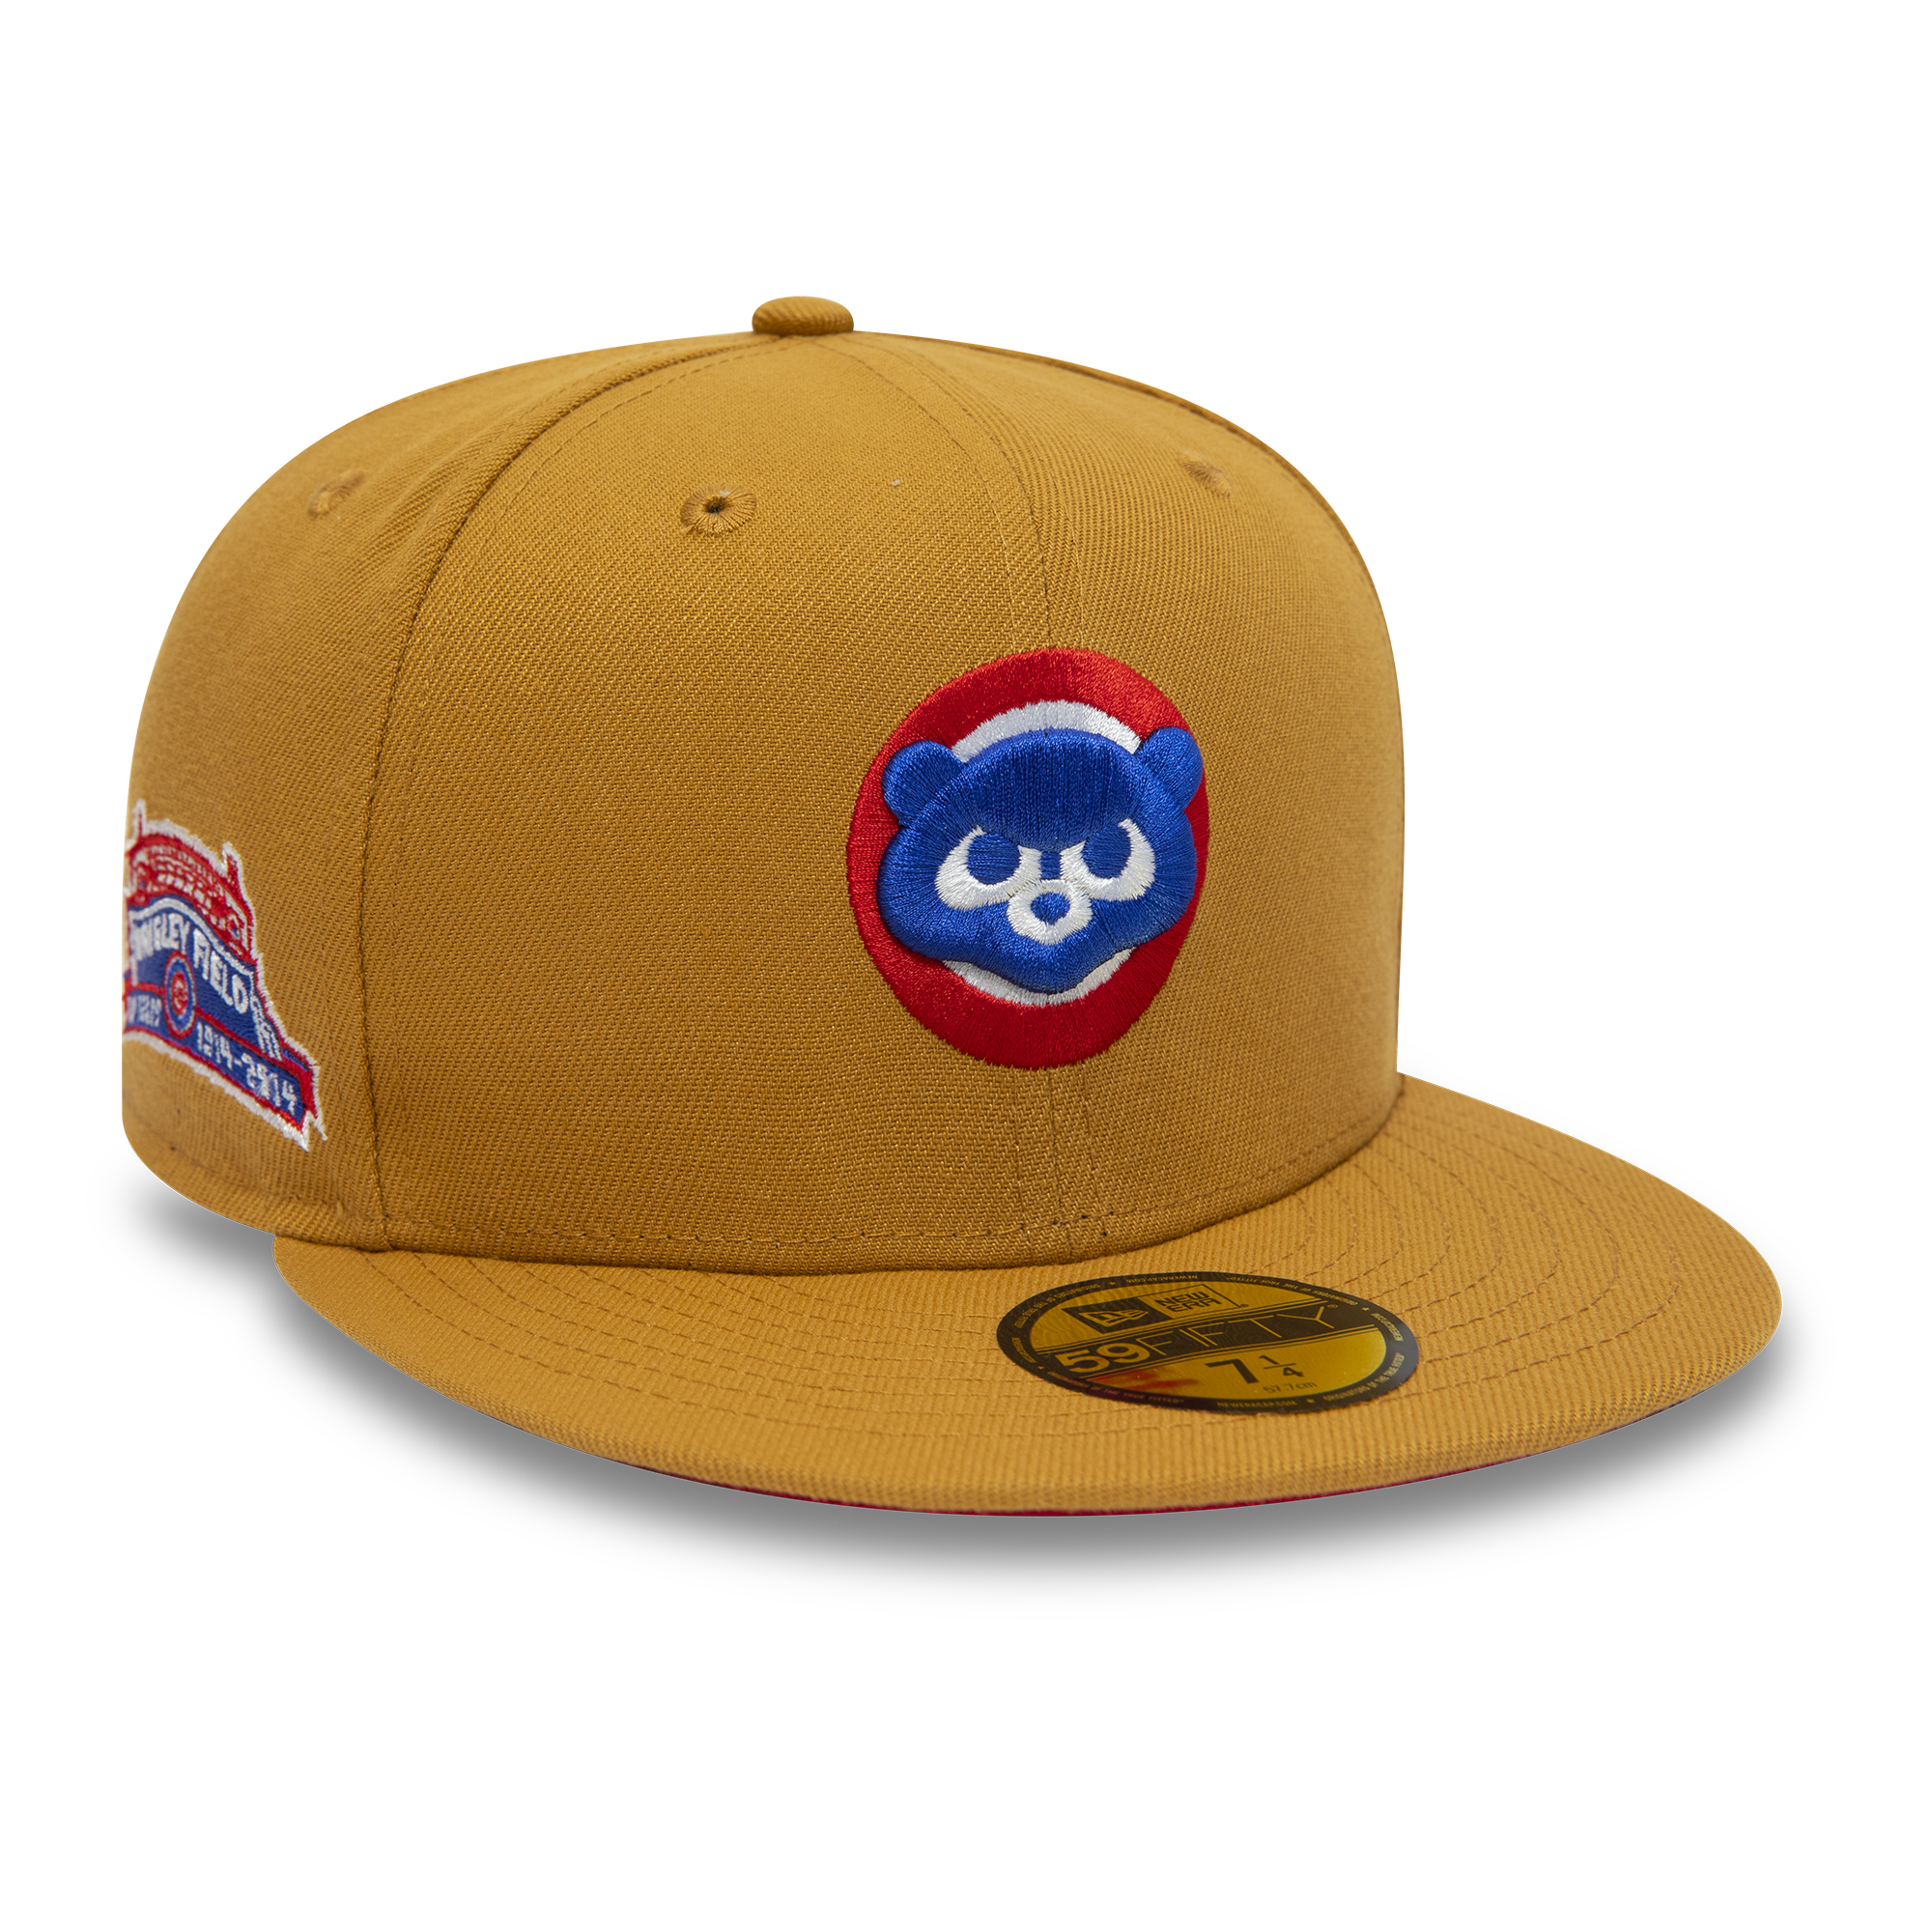 Official New Era Chicago Cubs MLB Panama Tan 59FIFTY Fitted Cap B8134_254